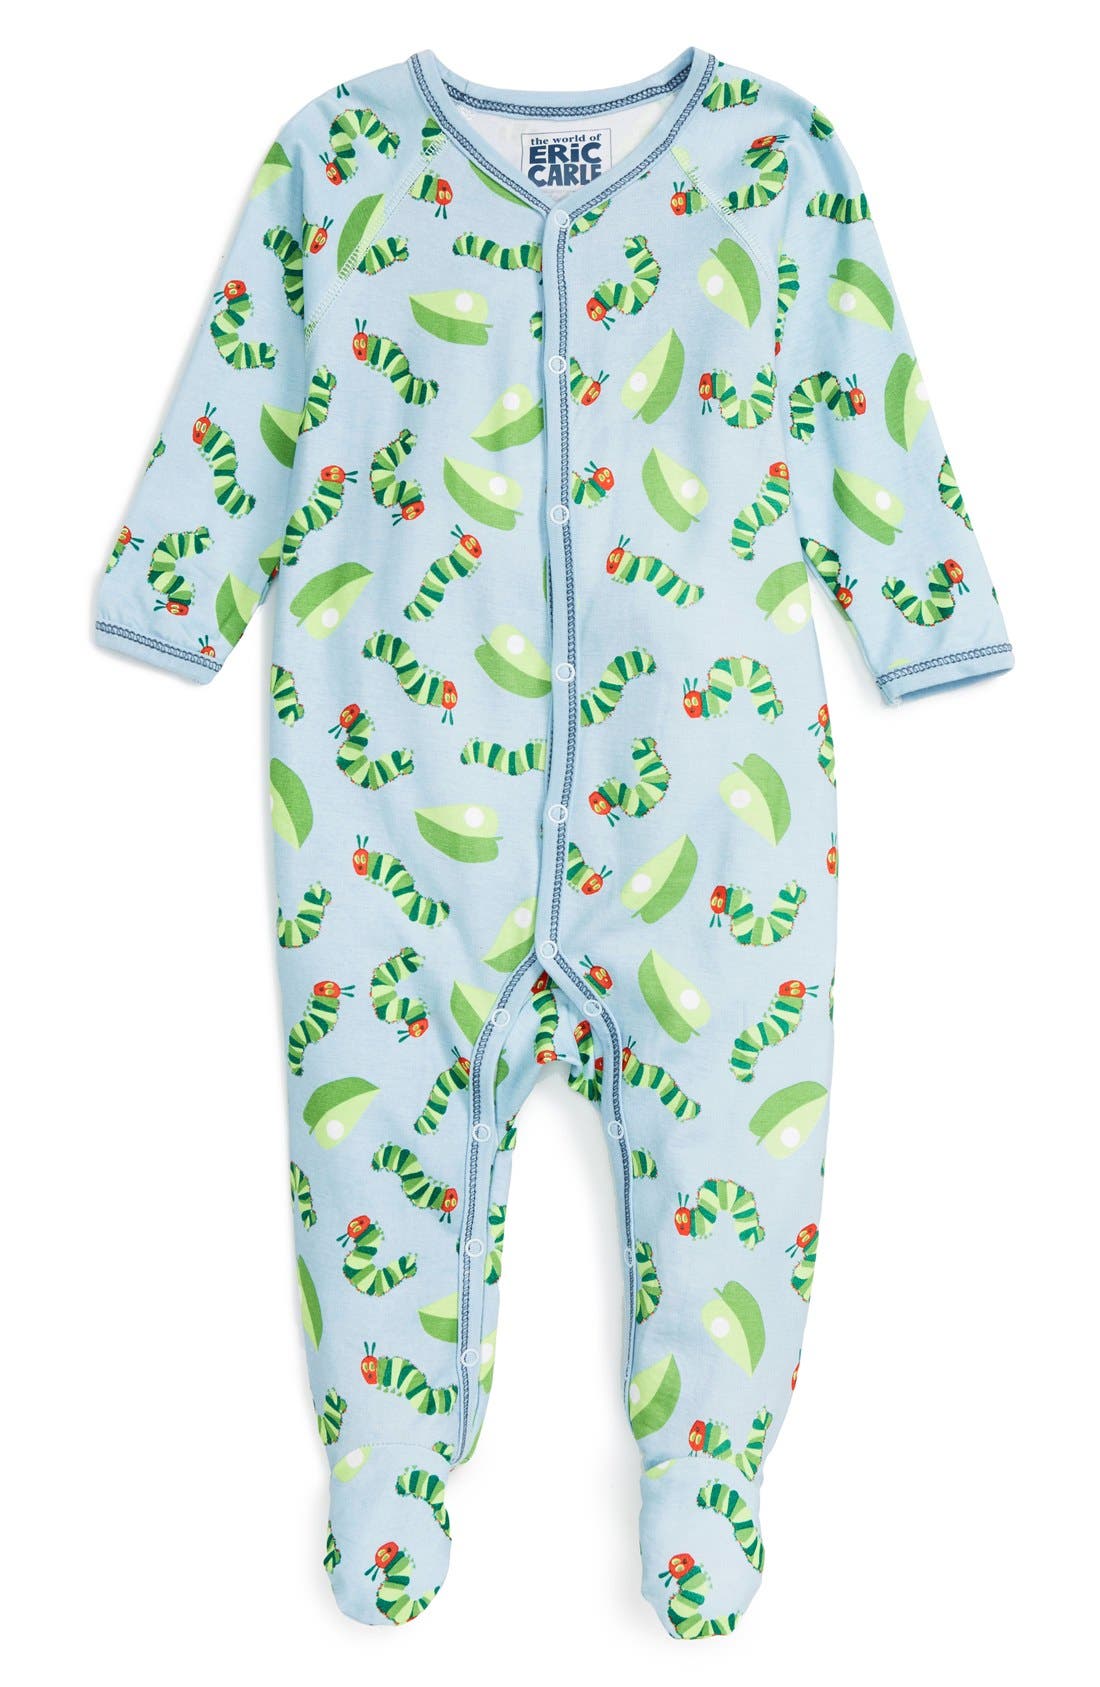 hungry caterpillar baby outfit